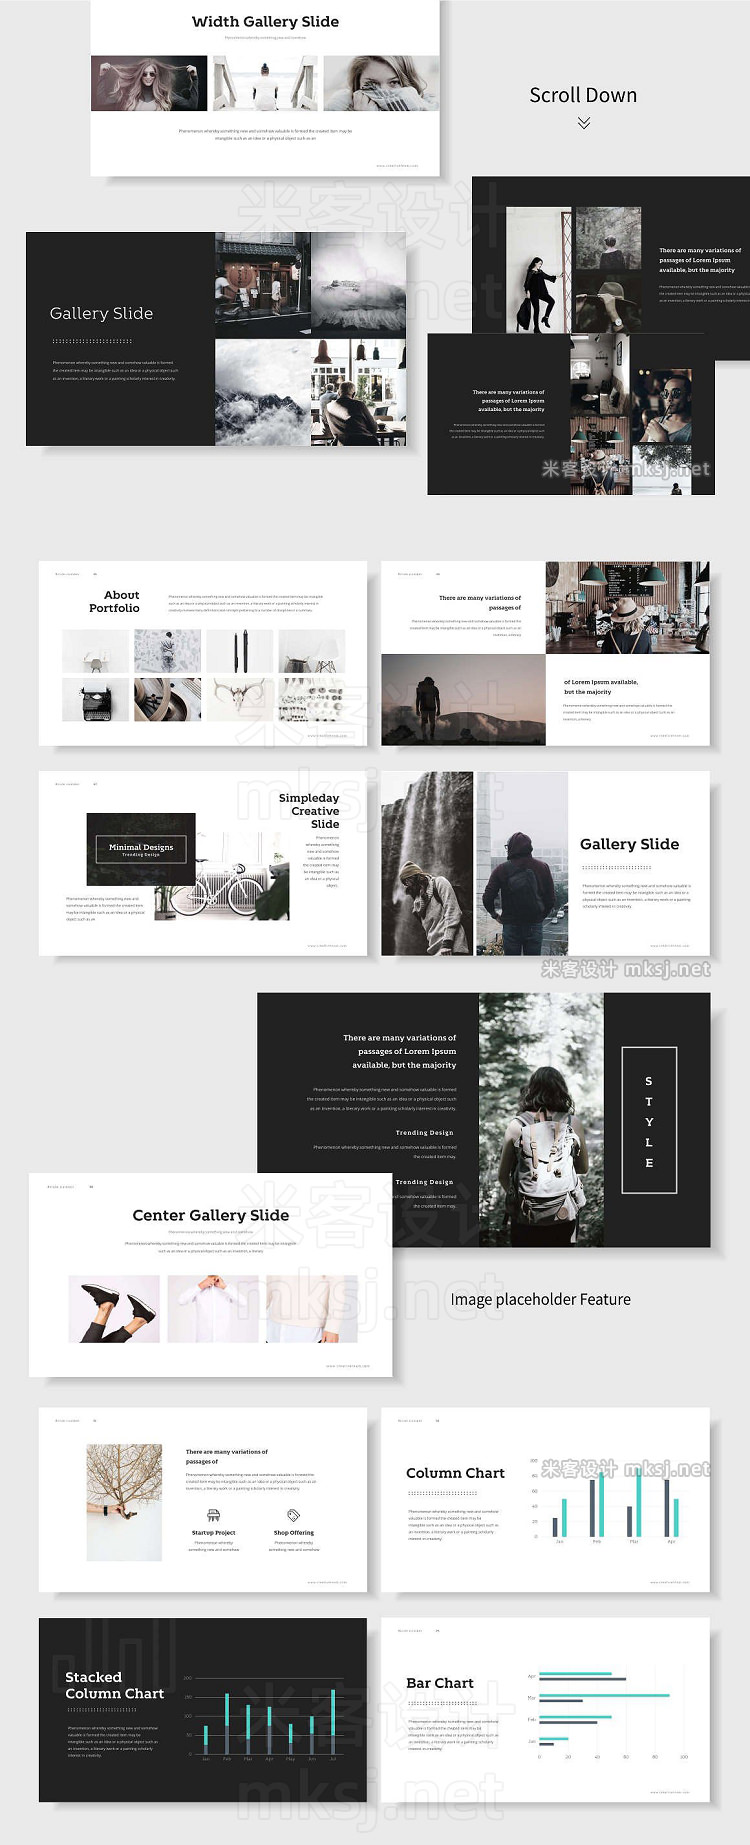 PPT模板 Simpleday Powerpoint Template